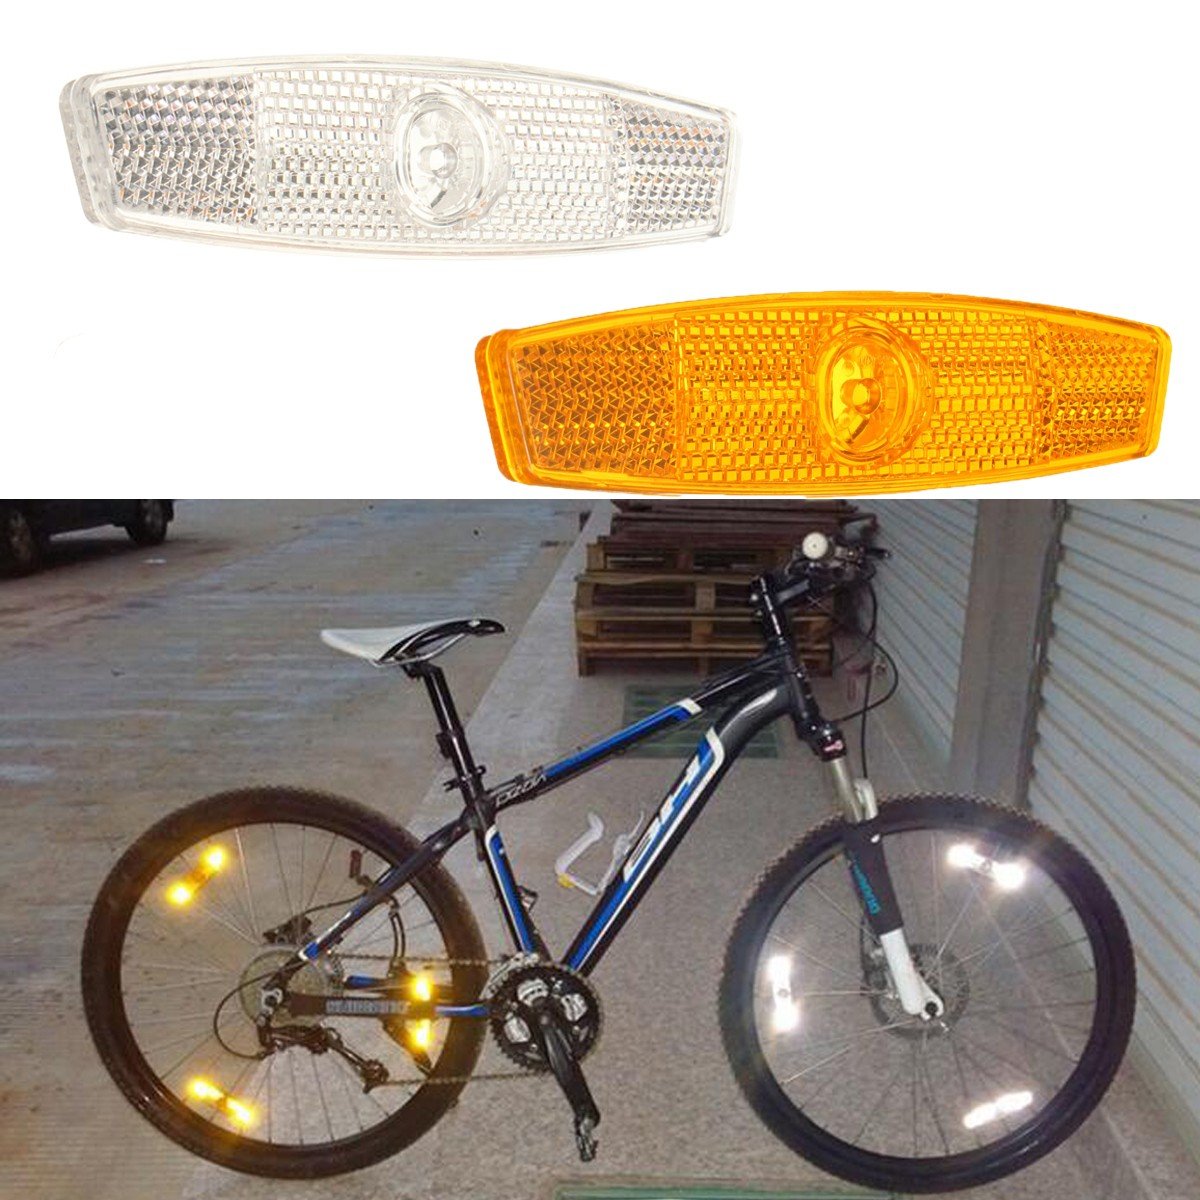 Bicycle Reflector Wheel Spoke Reflecting Warning Devicce For Safety